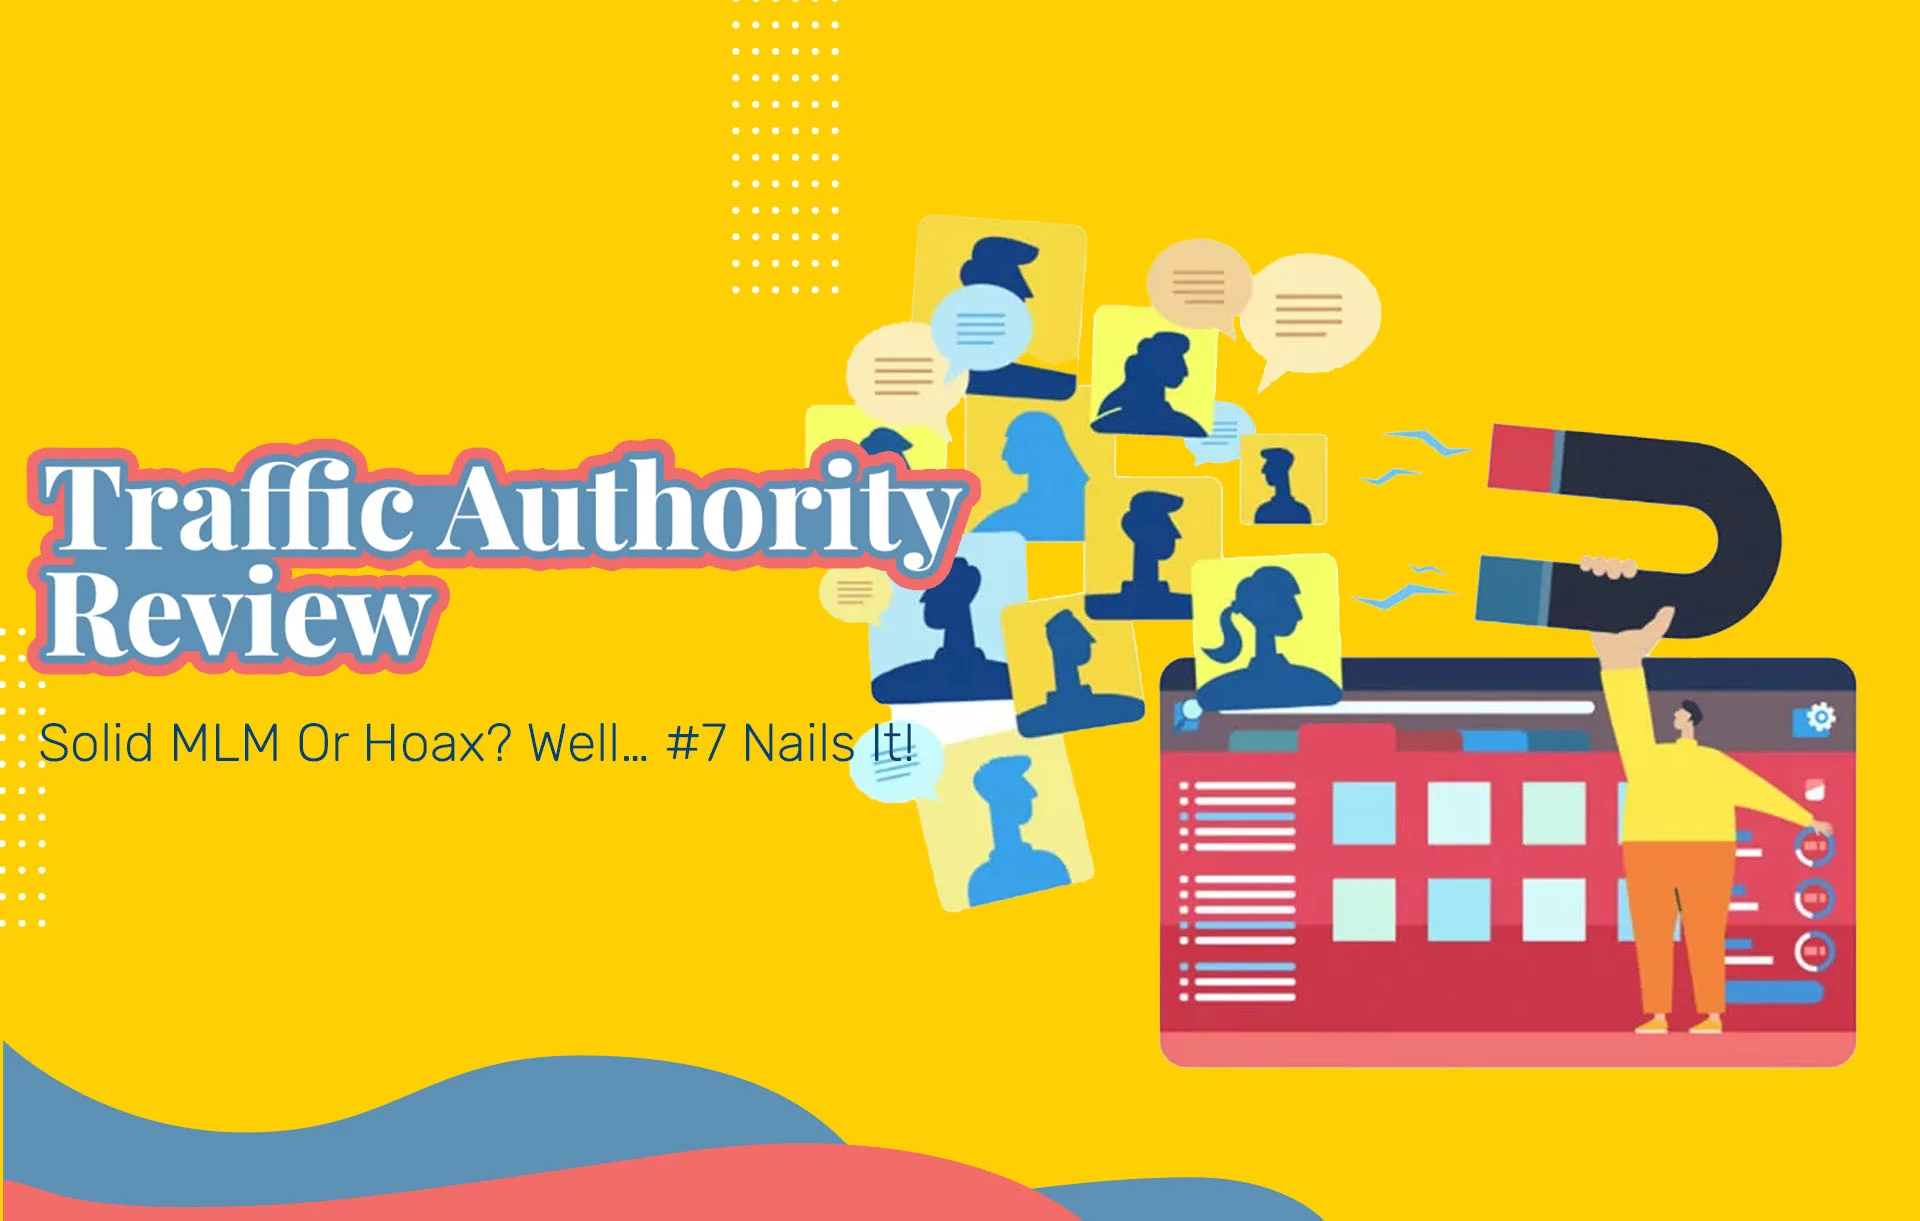 Traffic Authority Scam: Solid MLM or Hoax?